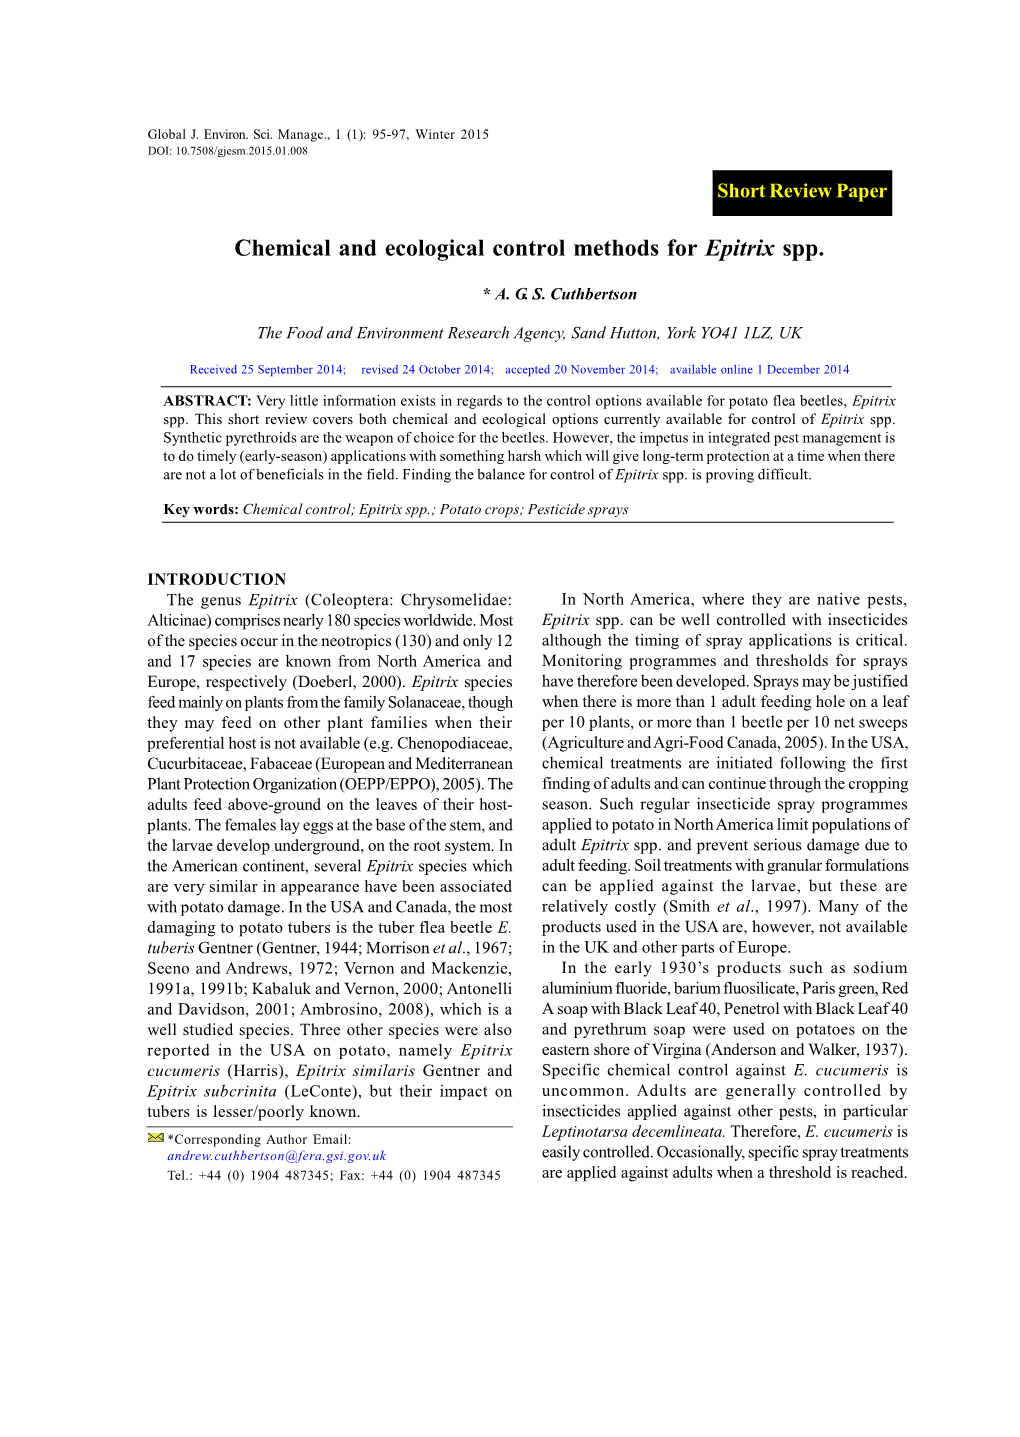 Chemical and Ecological Control Methods for Epitrix Spp